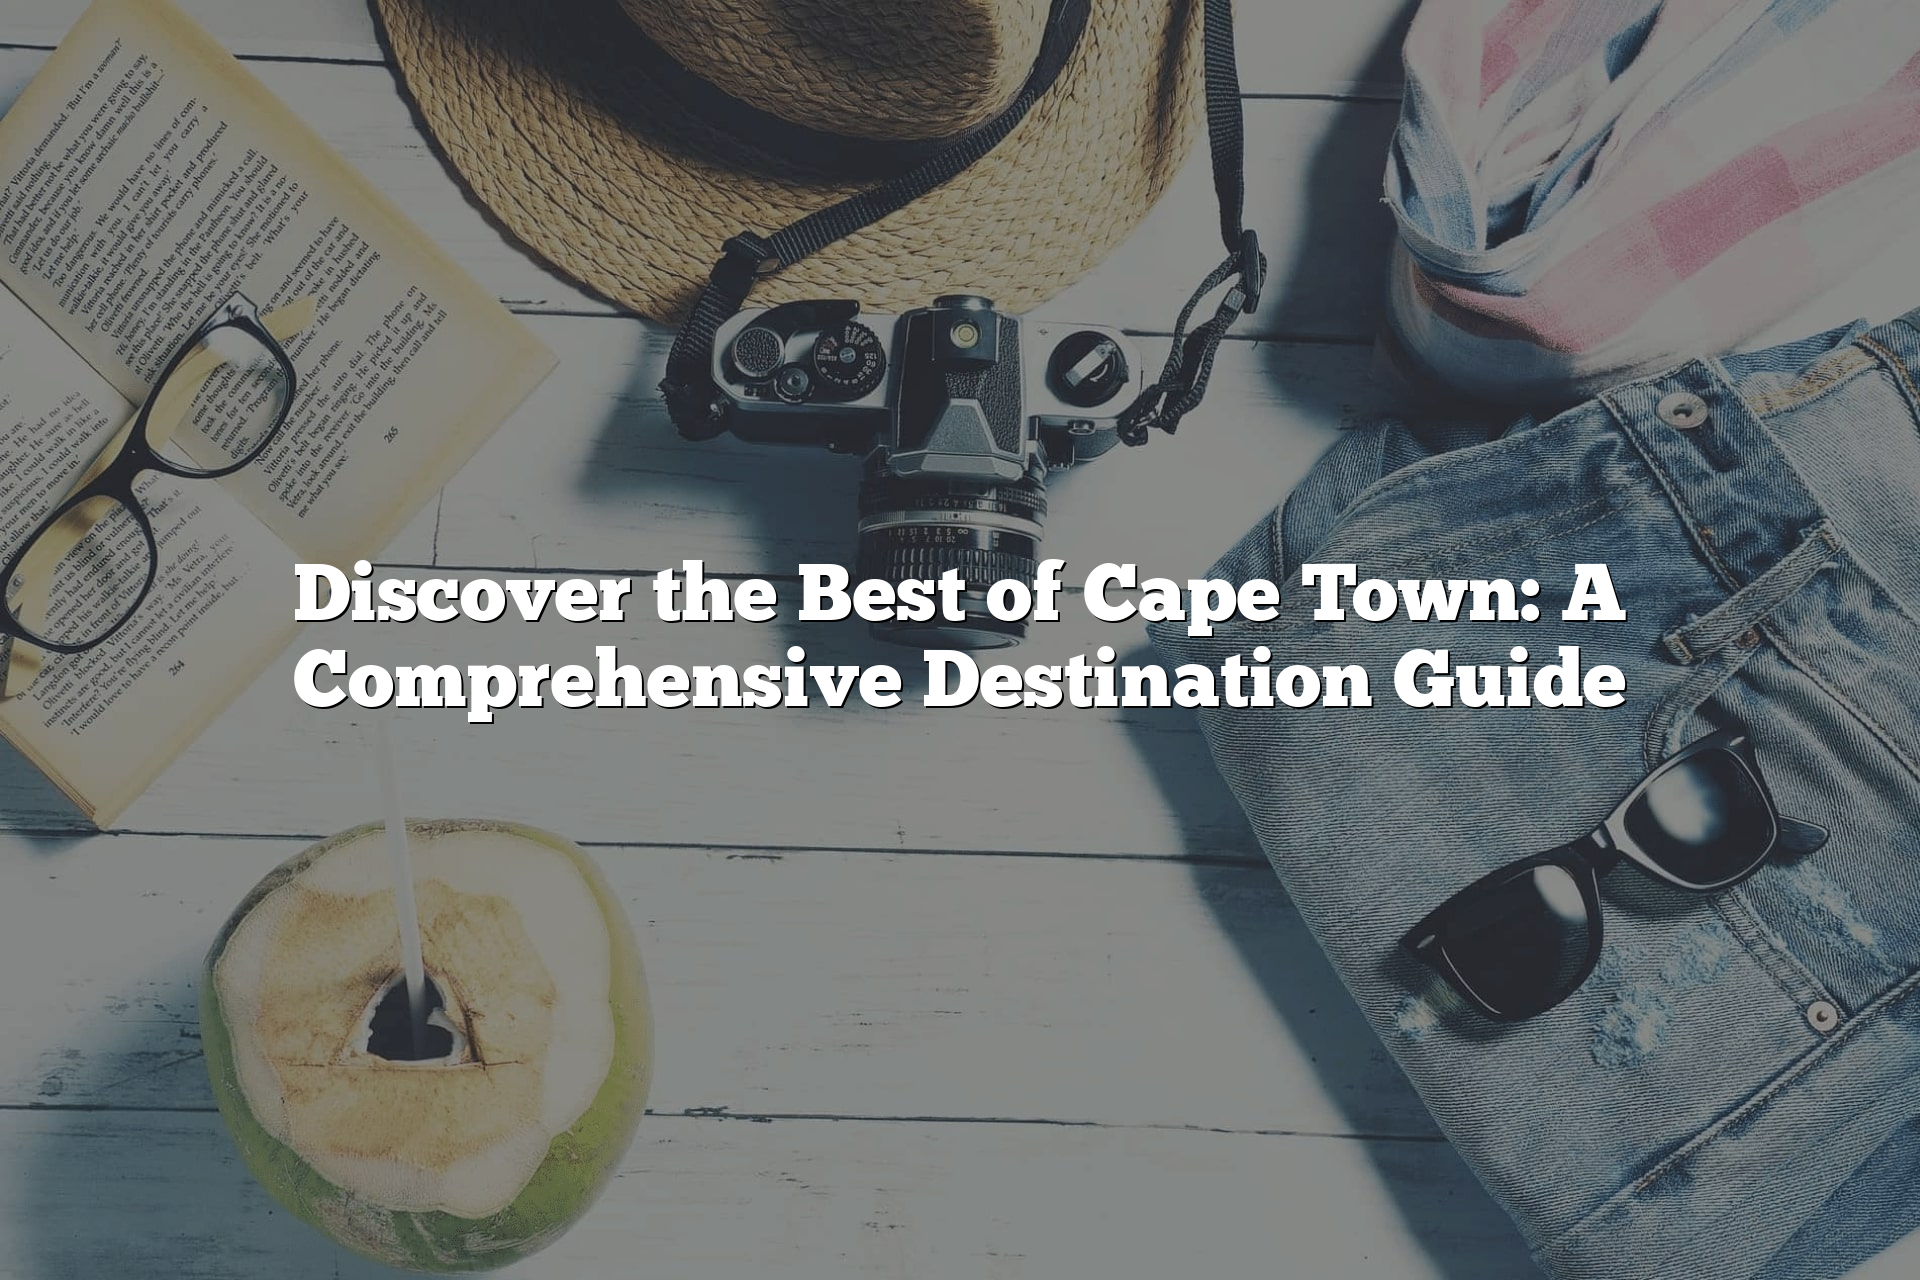 Discover the Best of Cape Town: A Comprehensive Destination Guide